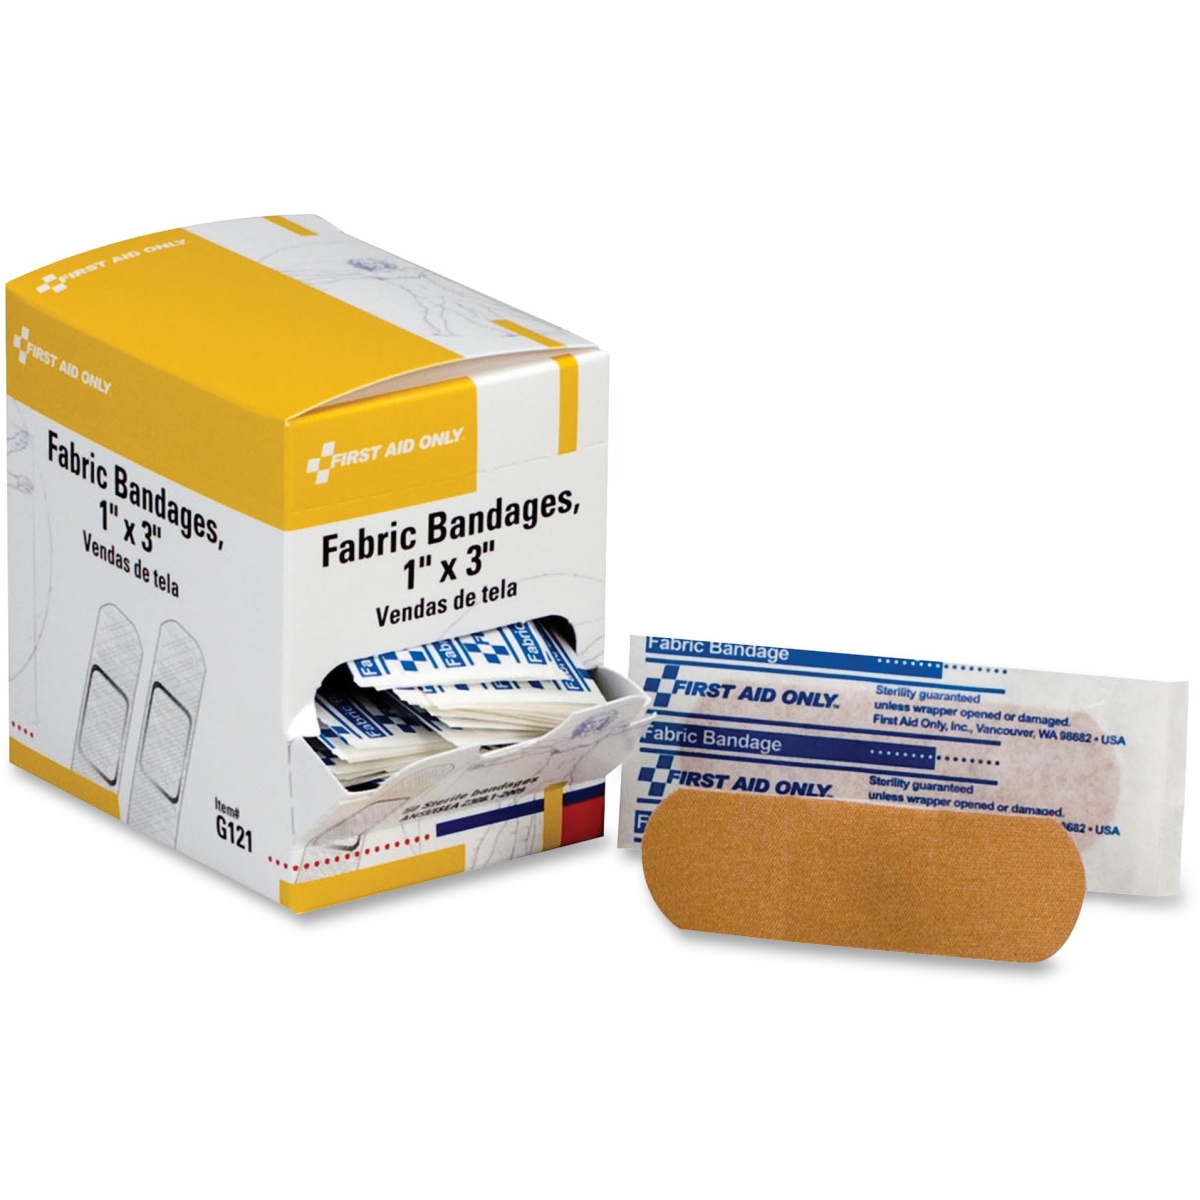 Faog121 1 X 3 In. Fabric Bandages - White, 50 Per Box